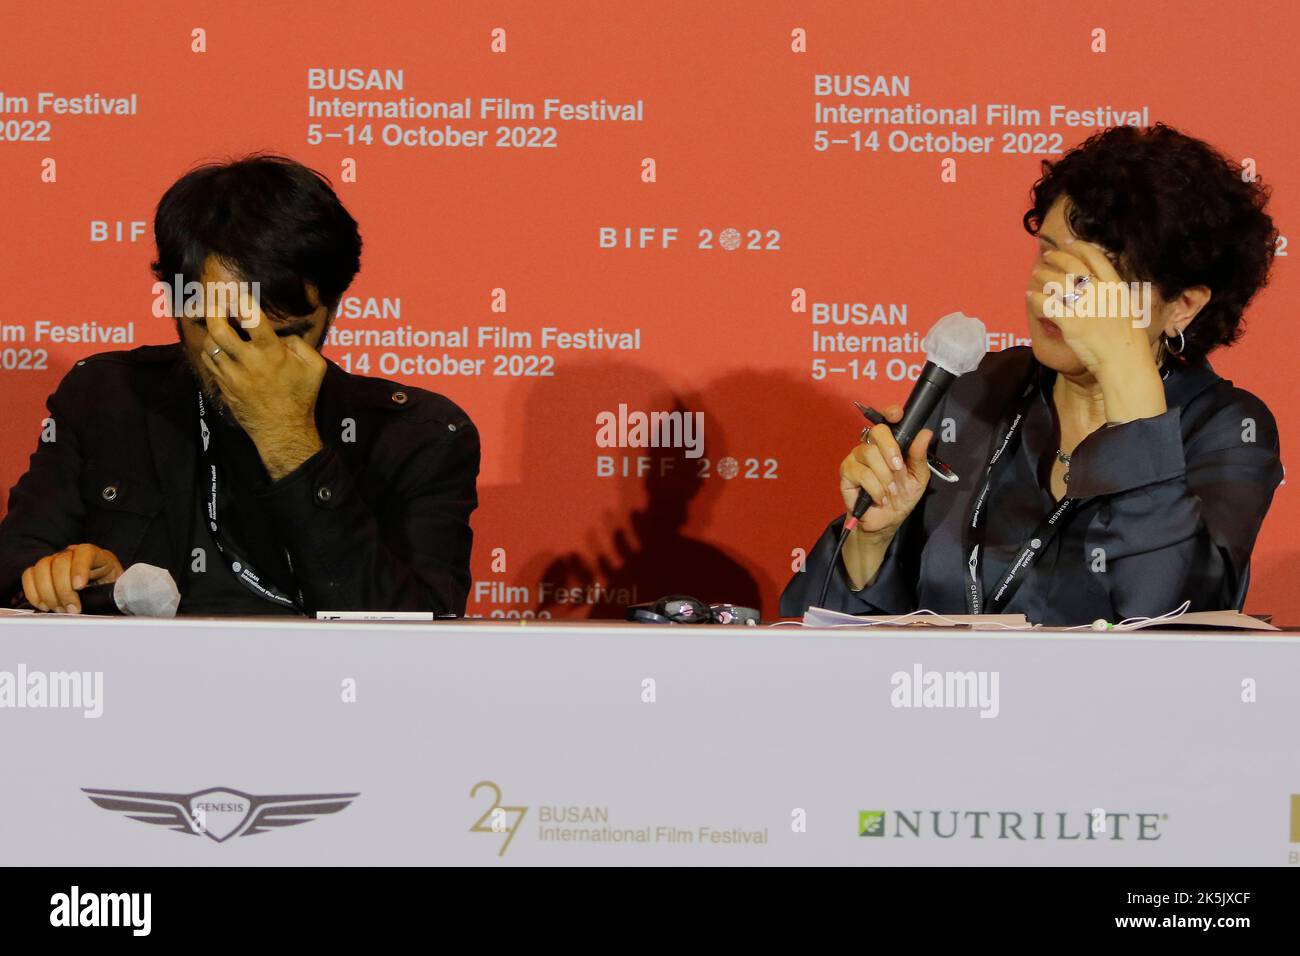 Oct 5, 2022-Busan, South Korea-Iranian Film director Reza Mohaghegh he's film 'Scent of Wind' press conference during the 27th Busan International Film Festival Opening film press conference at cinemountain in Busan, South Korea. Stock Photo